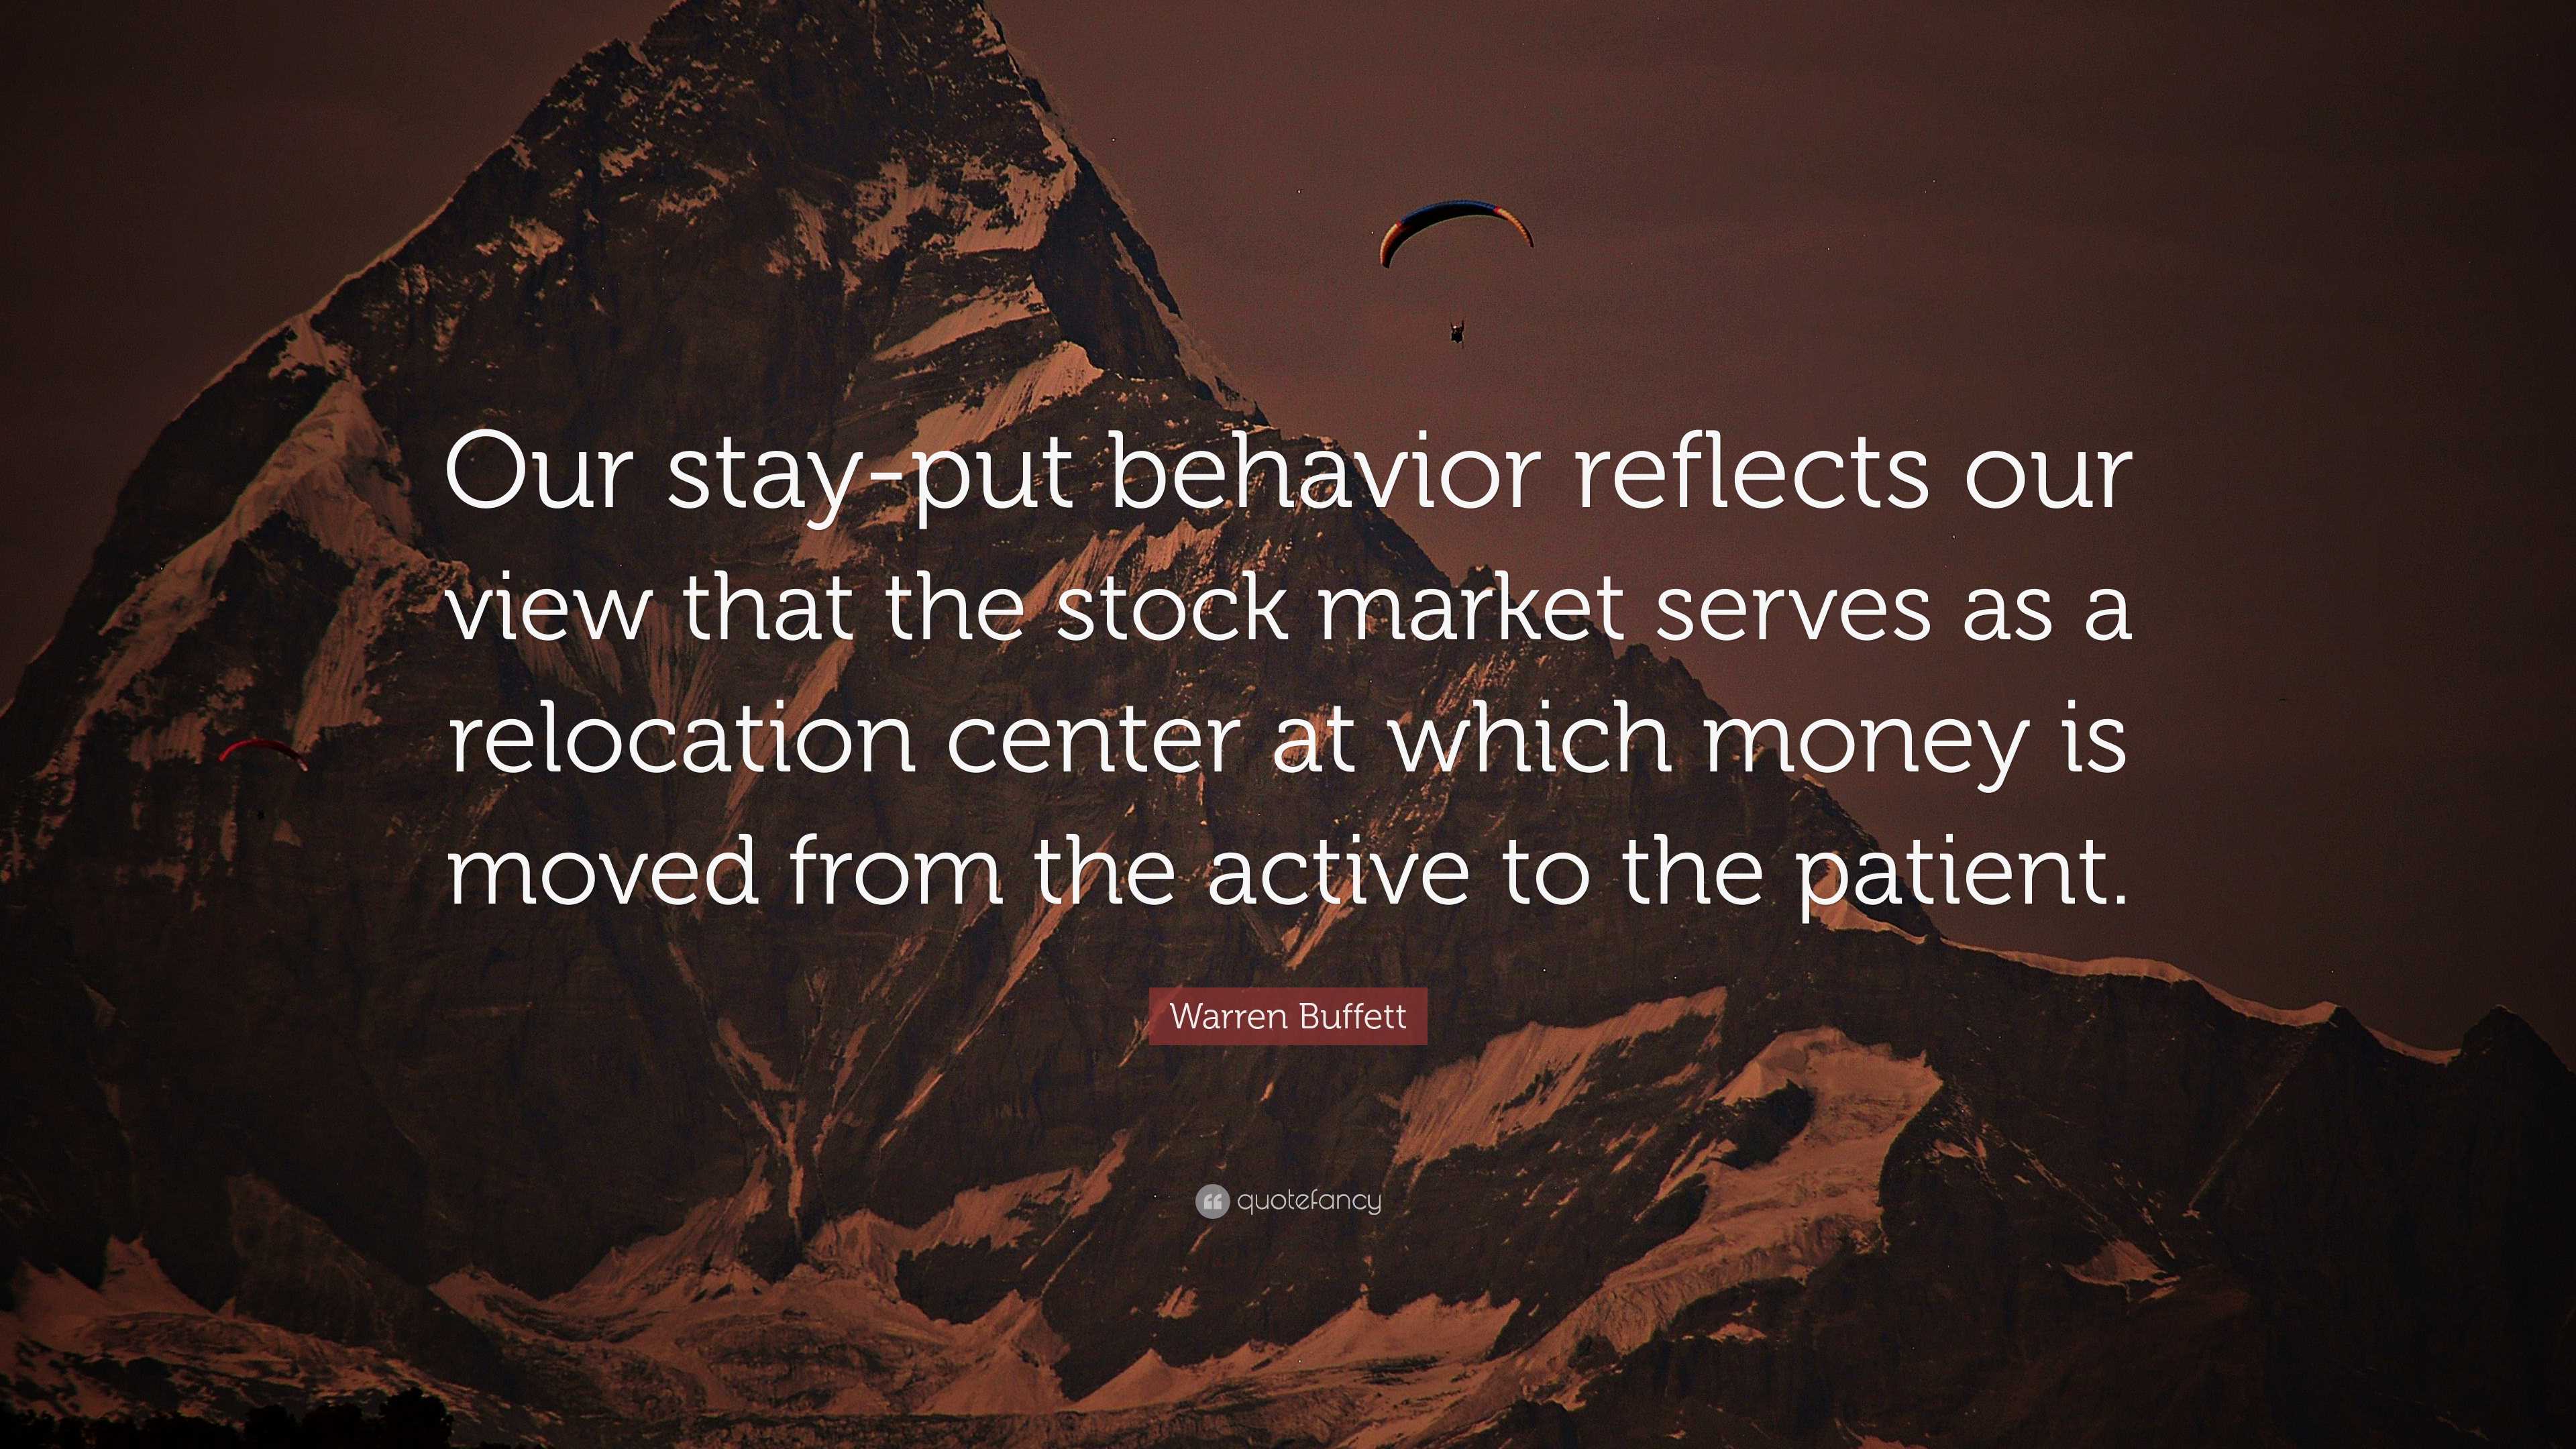 Warren Buffett Quote: “Our stay-put behavior reflects our view that the  stock market serves as a relocation center at which money is moved from”